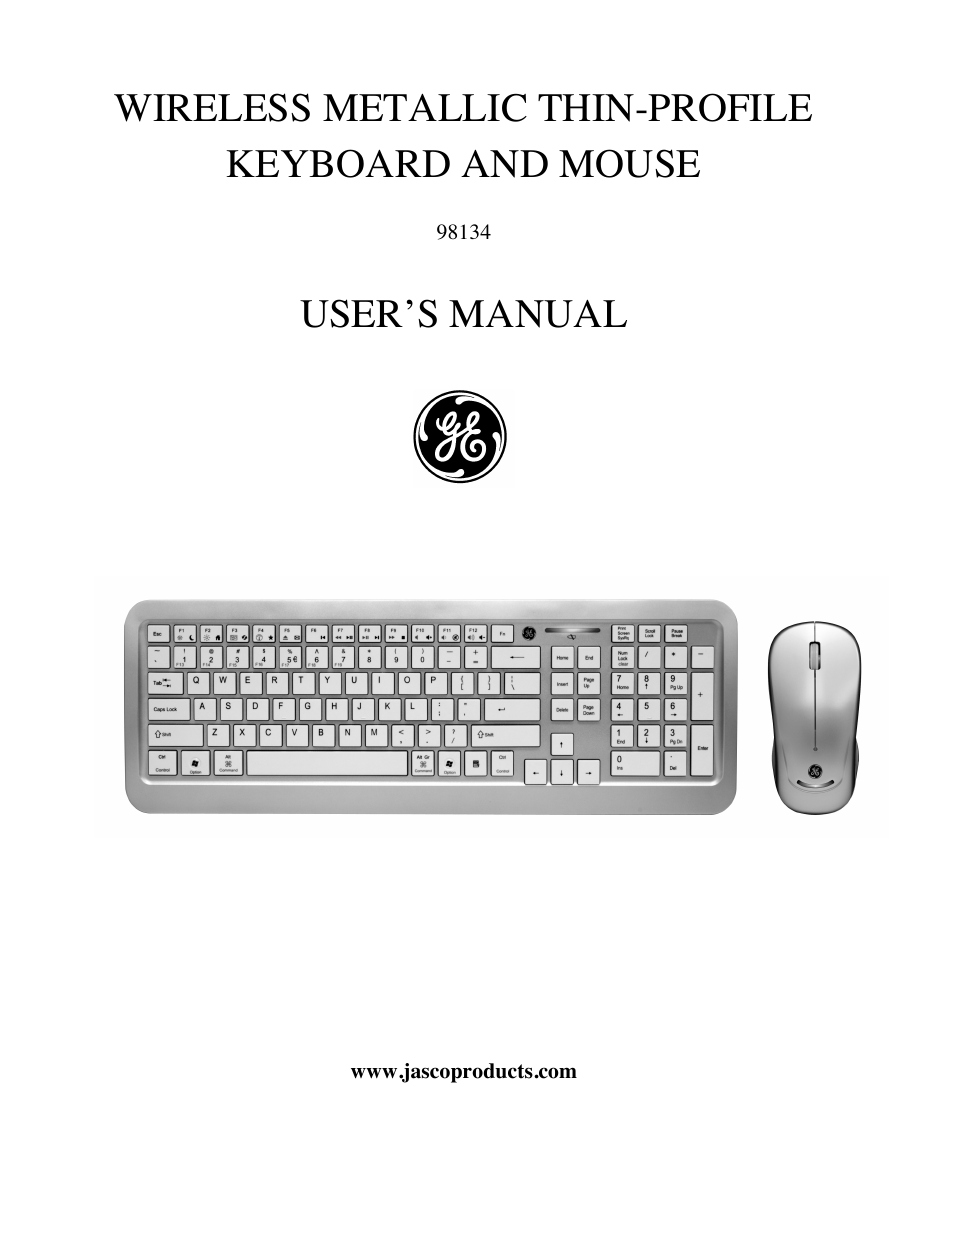 GE 98134 GE Thin-Profile Keyboard and Mouse User Manual | 7 pages